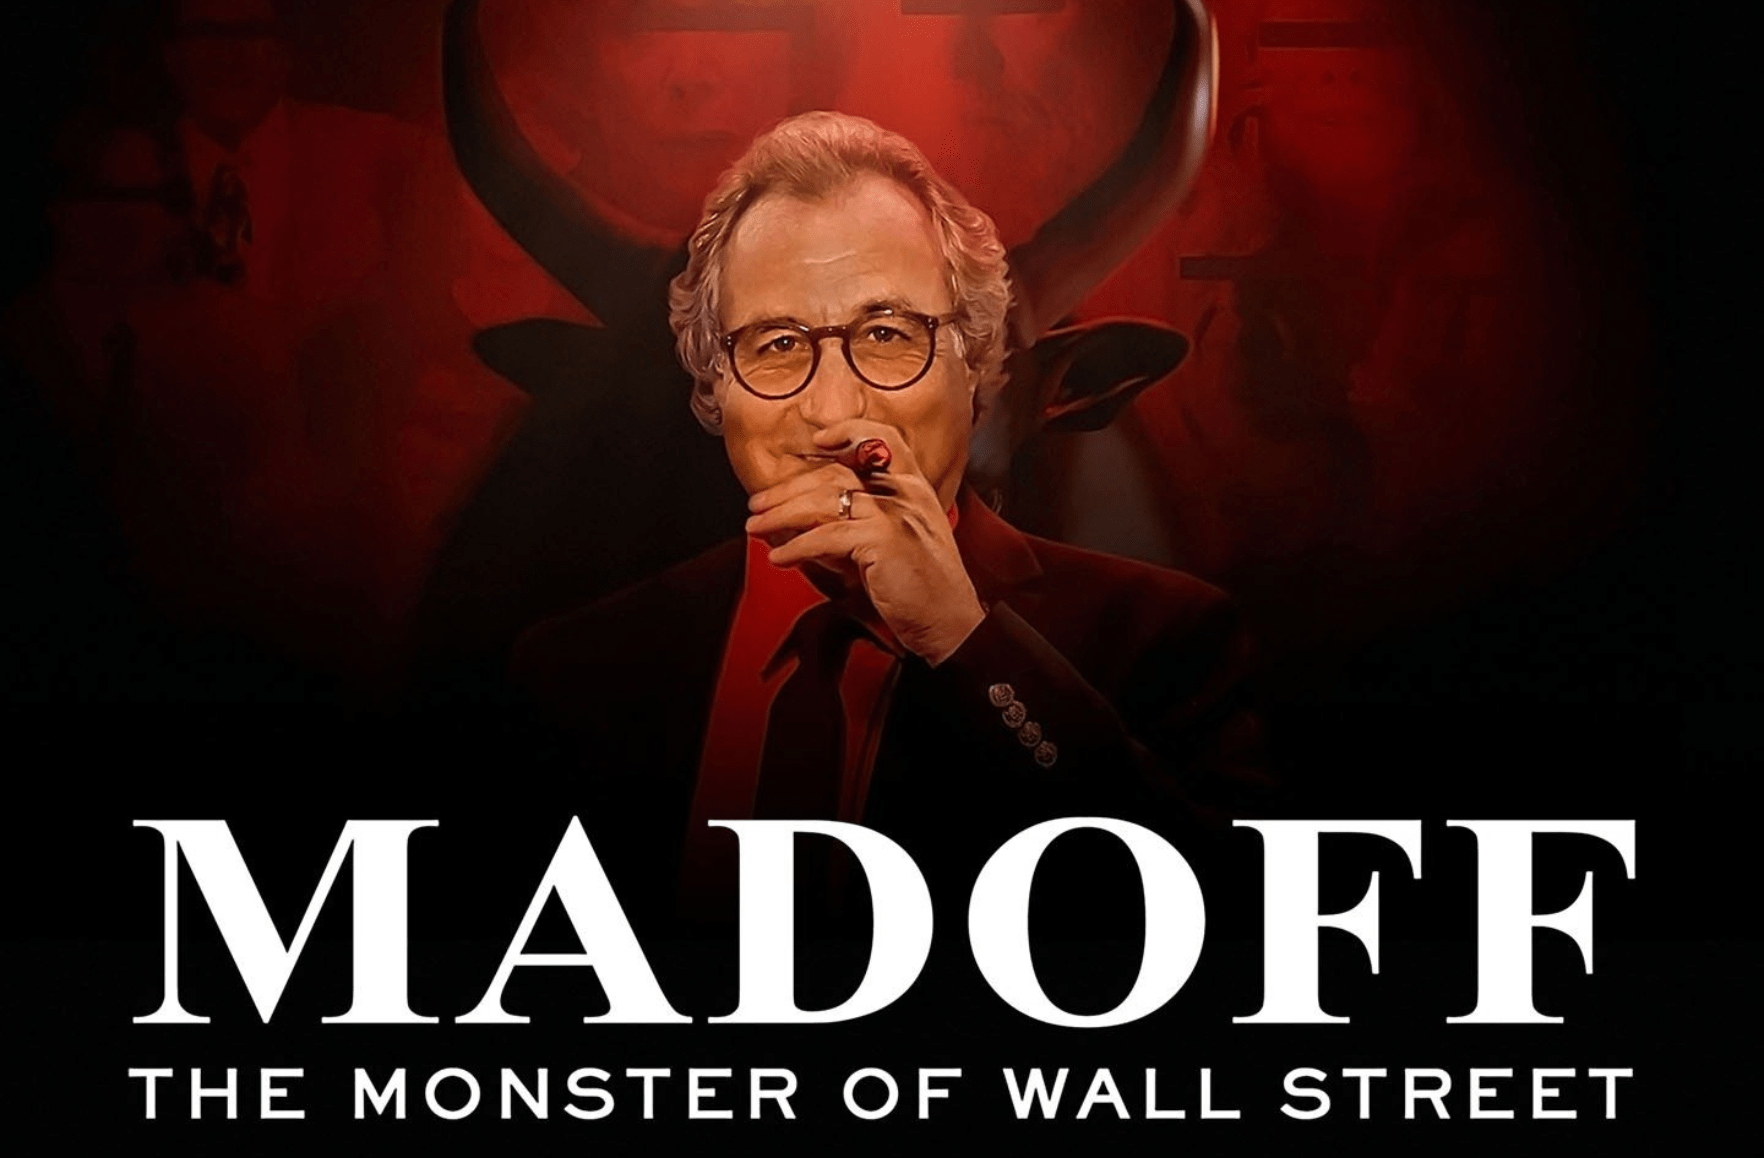 MADOFF The Monster of Wall Street